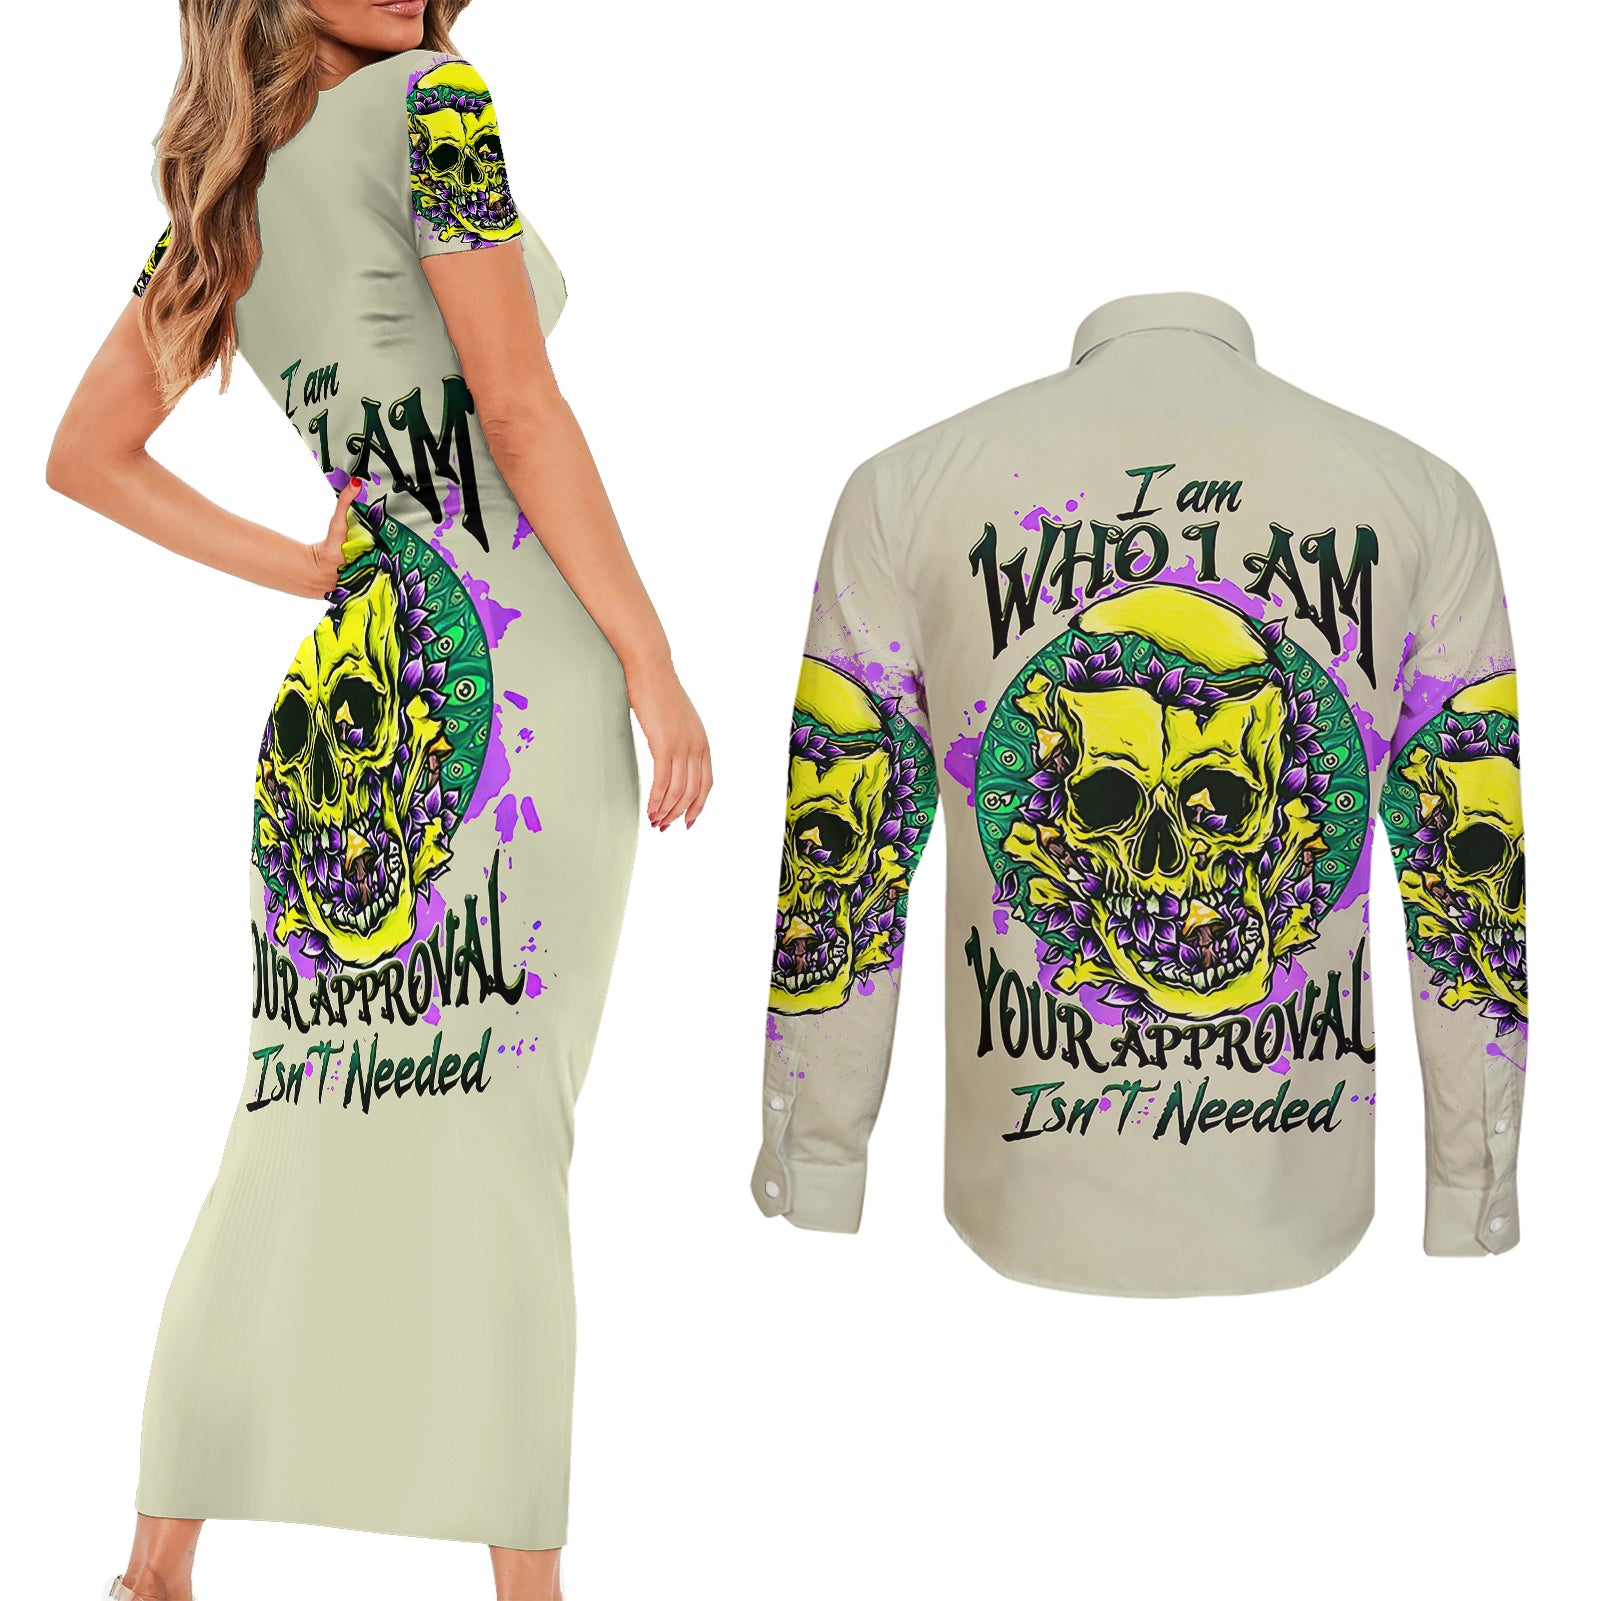 flower-skull-couples-matching-short-sleeve-bodycon-dress-and-long-sleeve-button-shirts-iam-who-iam-your-approval-isnt-need